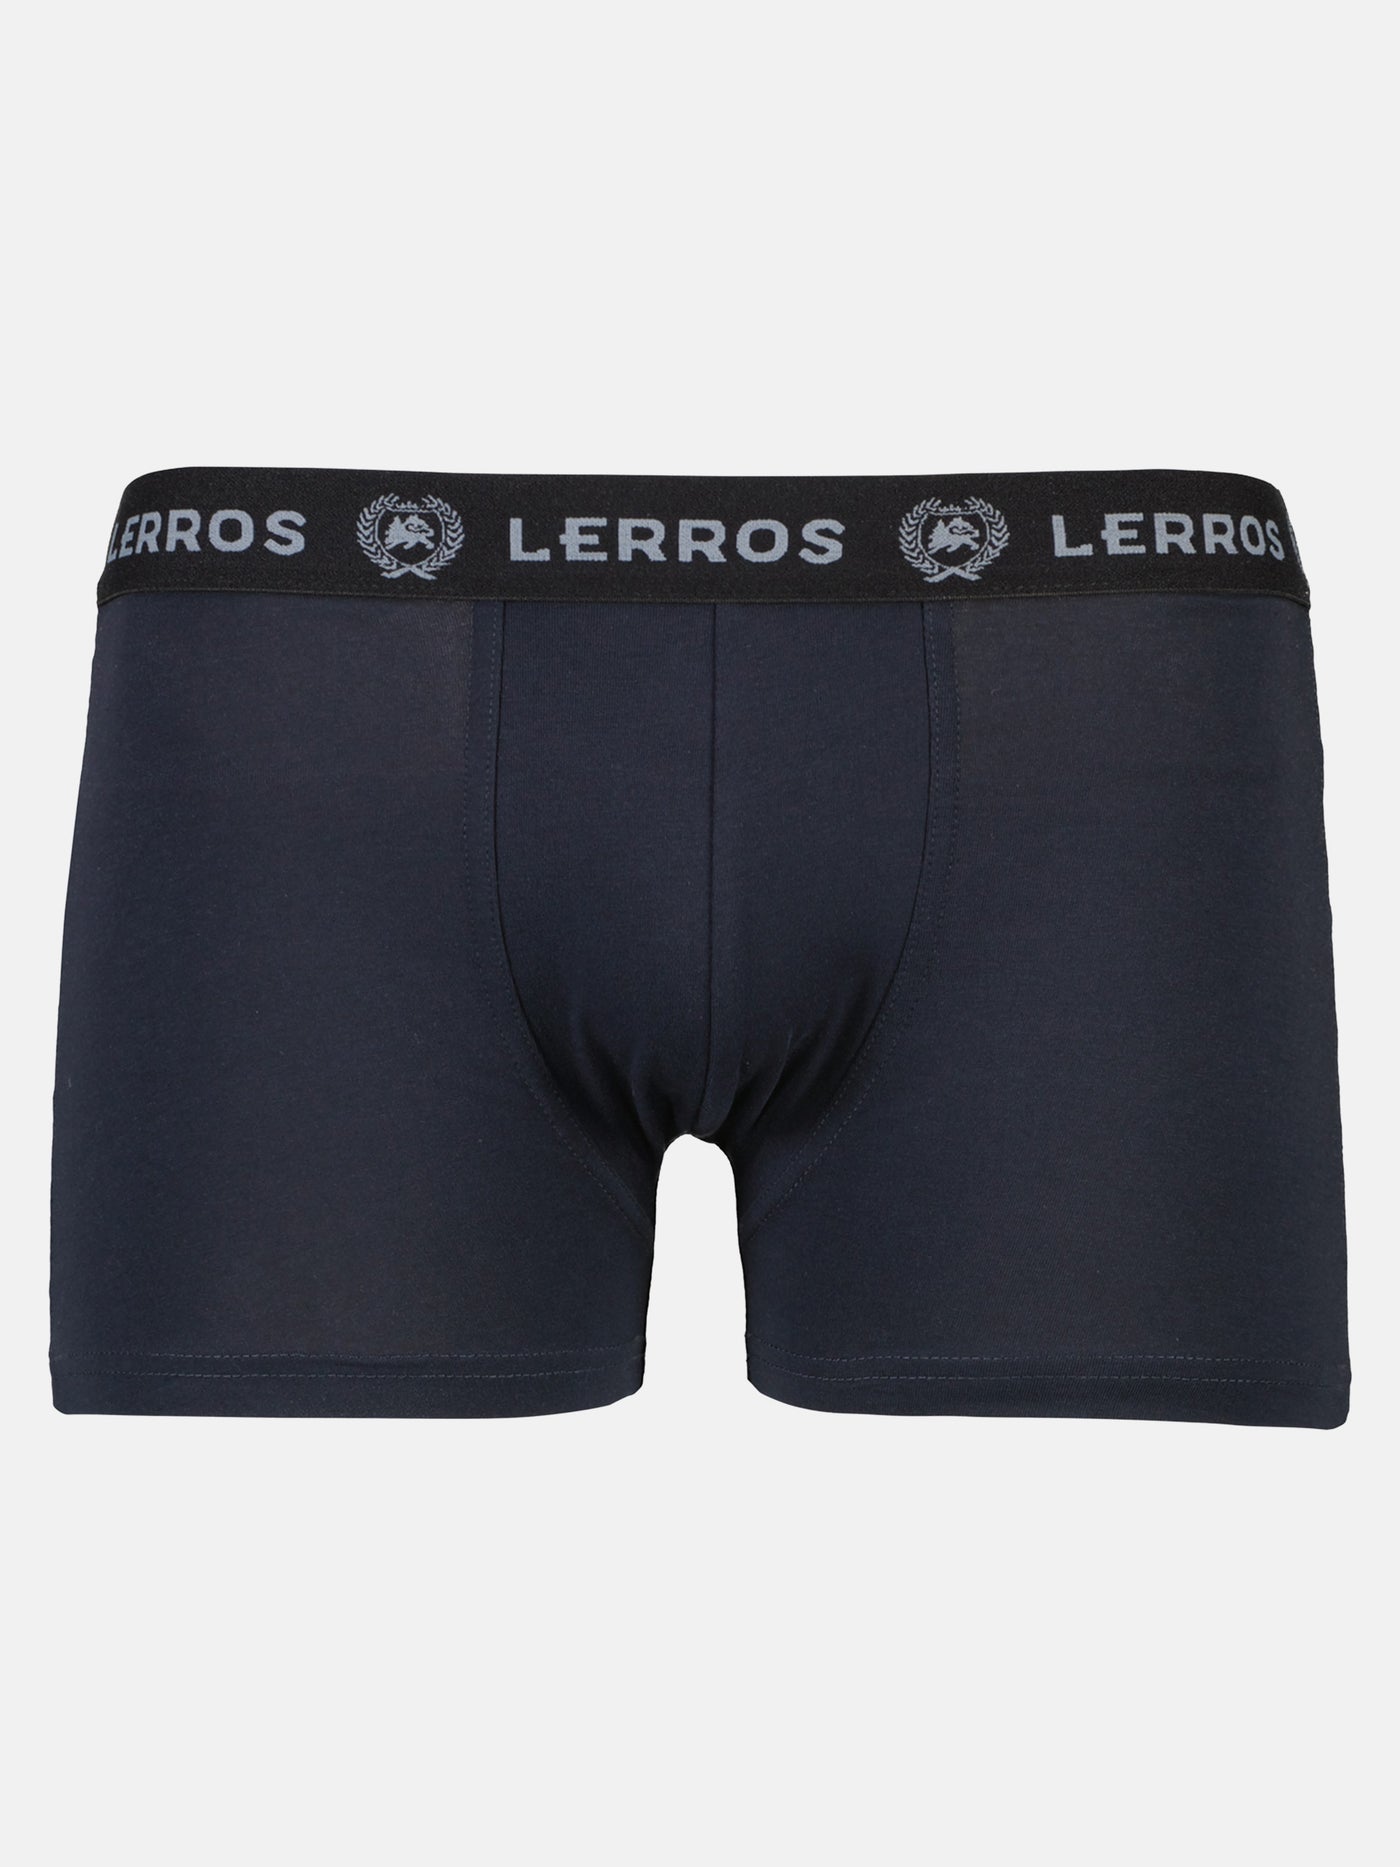 Boxer shorts in a 3-pack